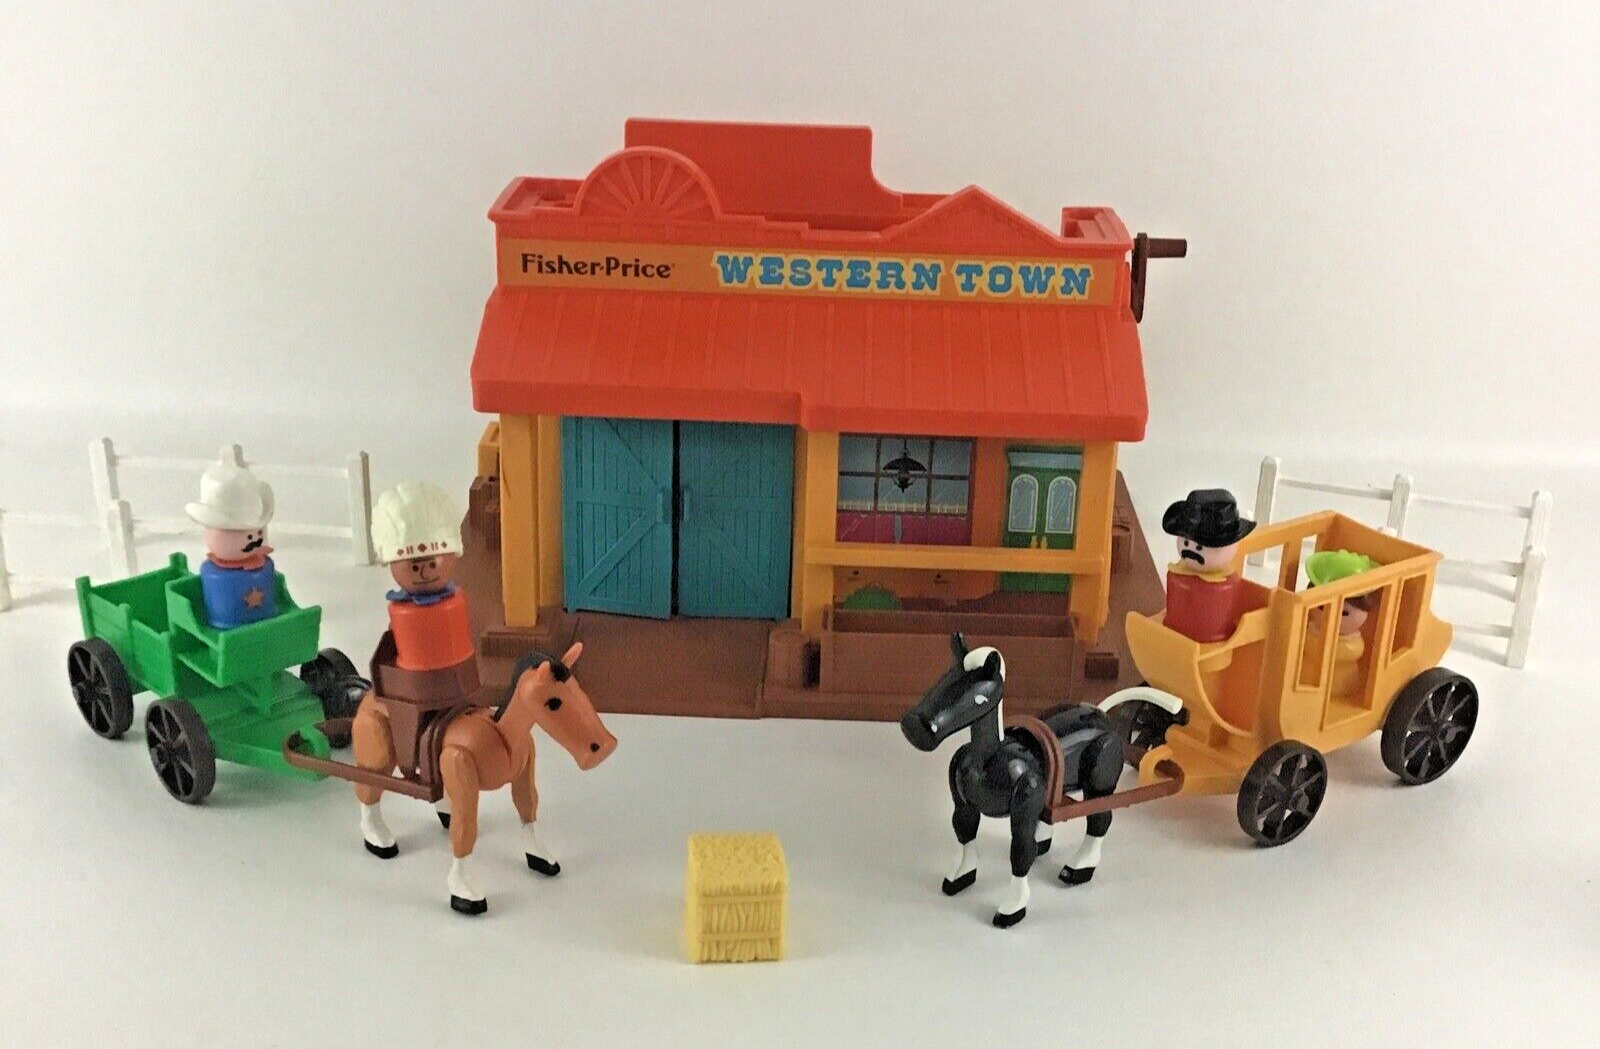 Fisher Price Play Family Little People Western Town Playset Figures Vintage 1982 - $222.70